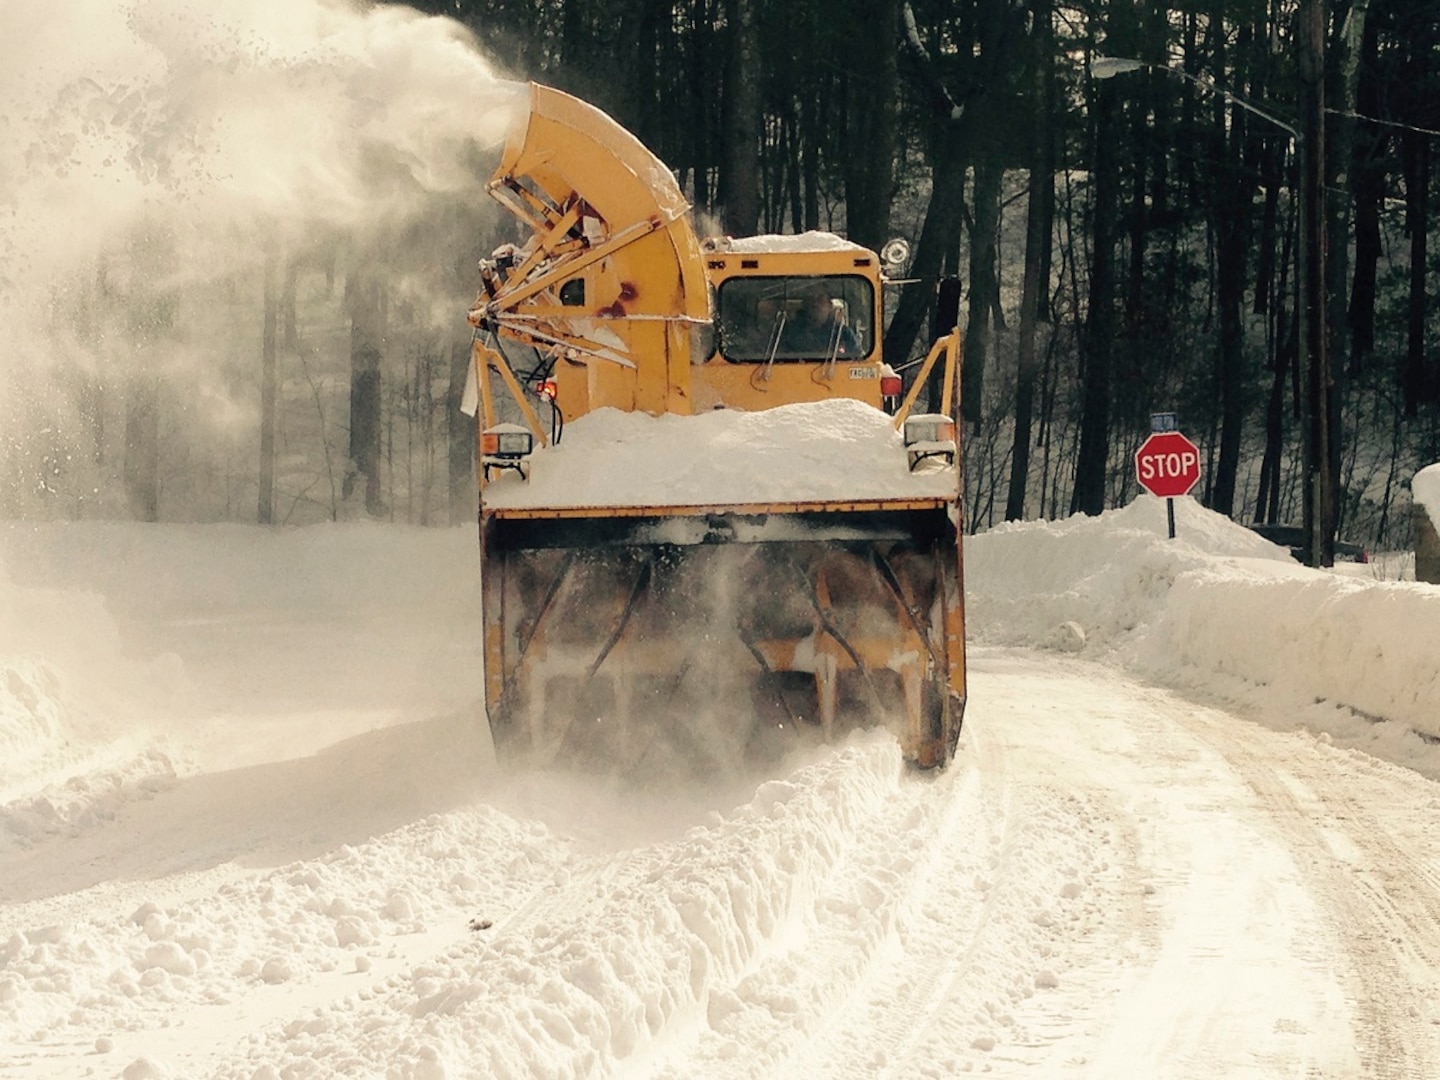 A former military snowblower drives a snowy road.